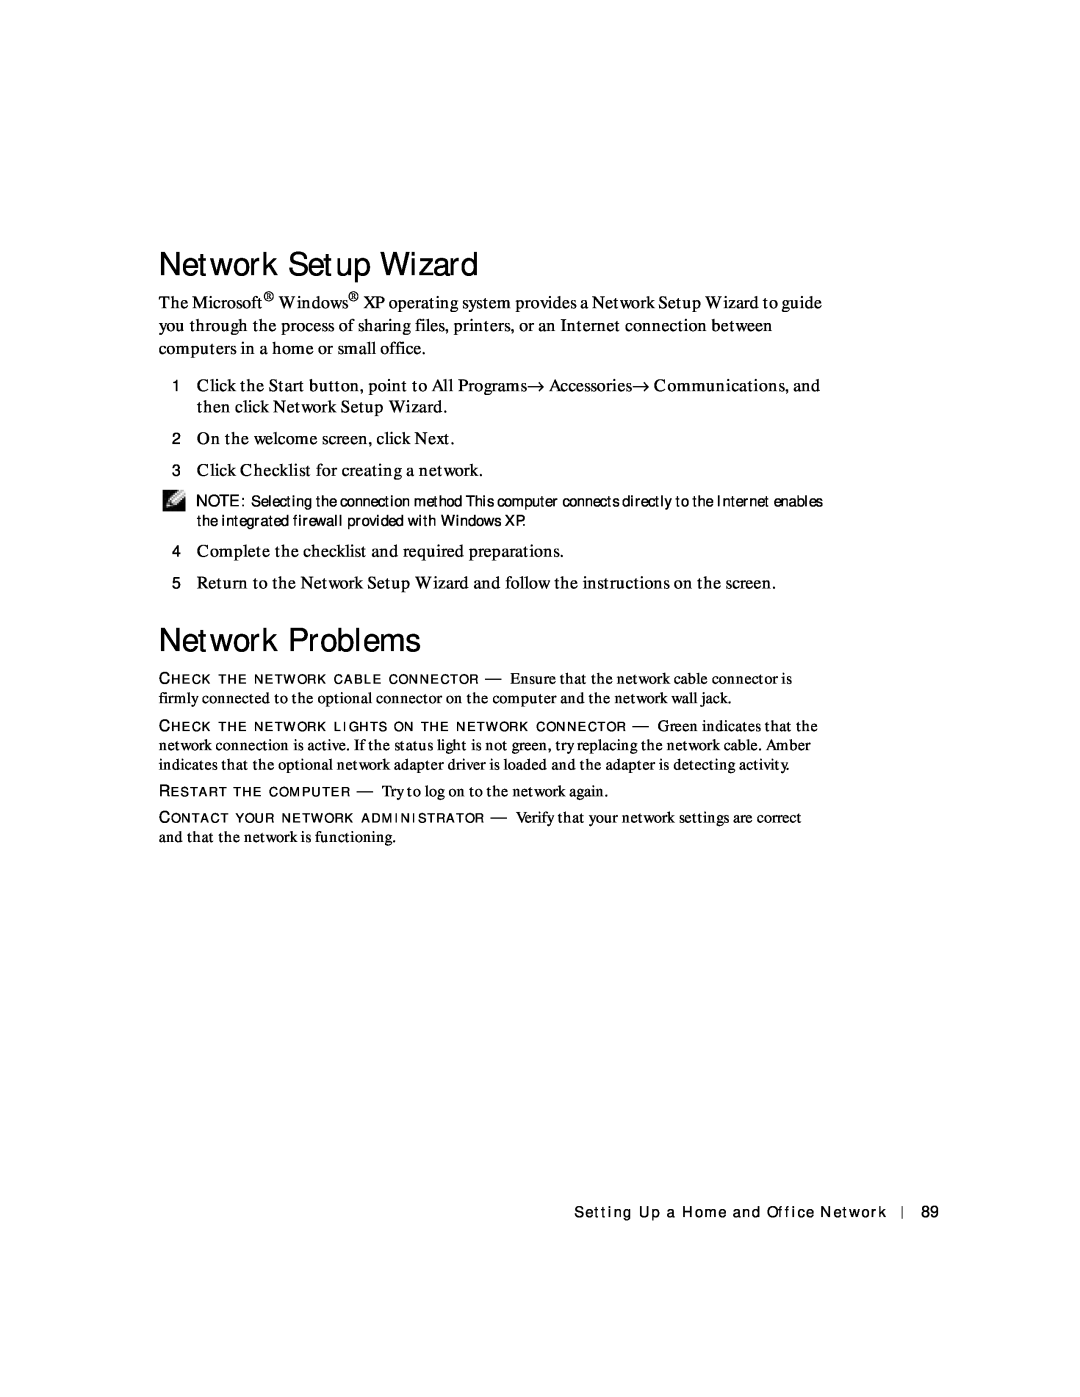 Dell 8600 manual Network Setup Wizard, Network Problems, Click Checklist for creating a network 